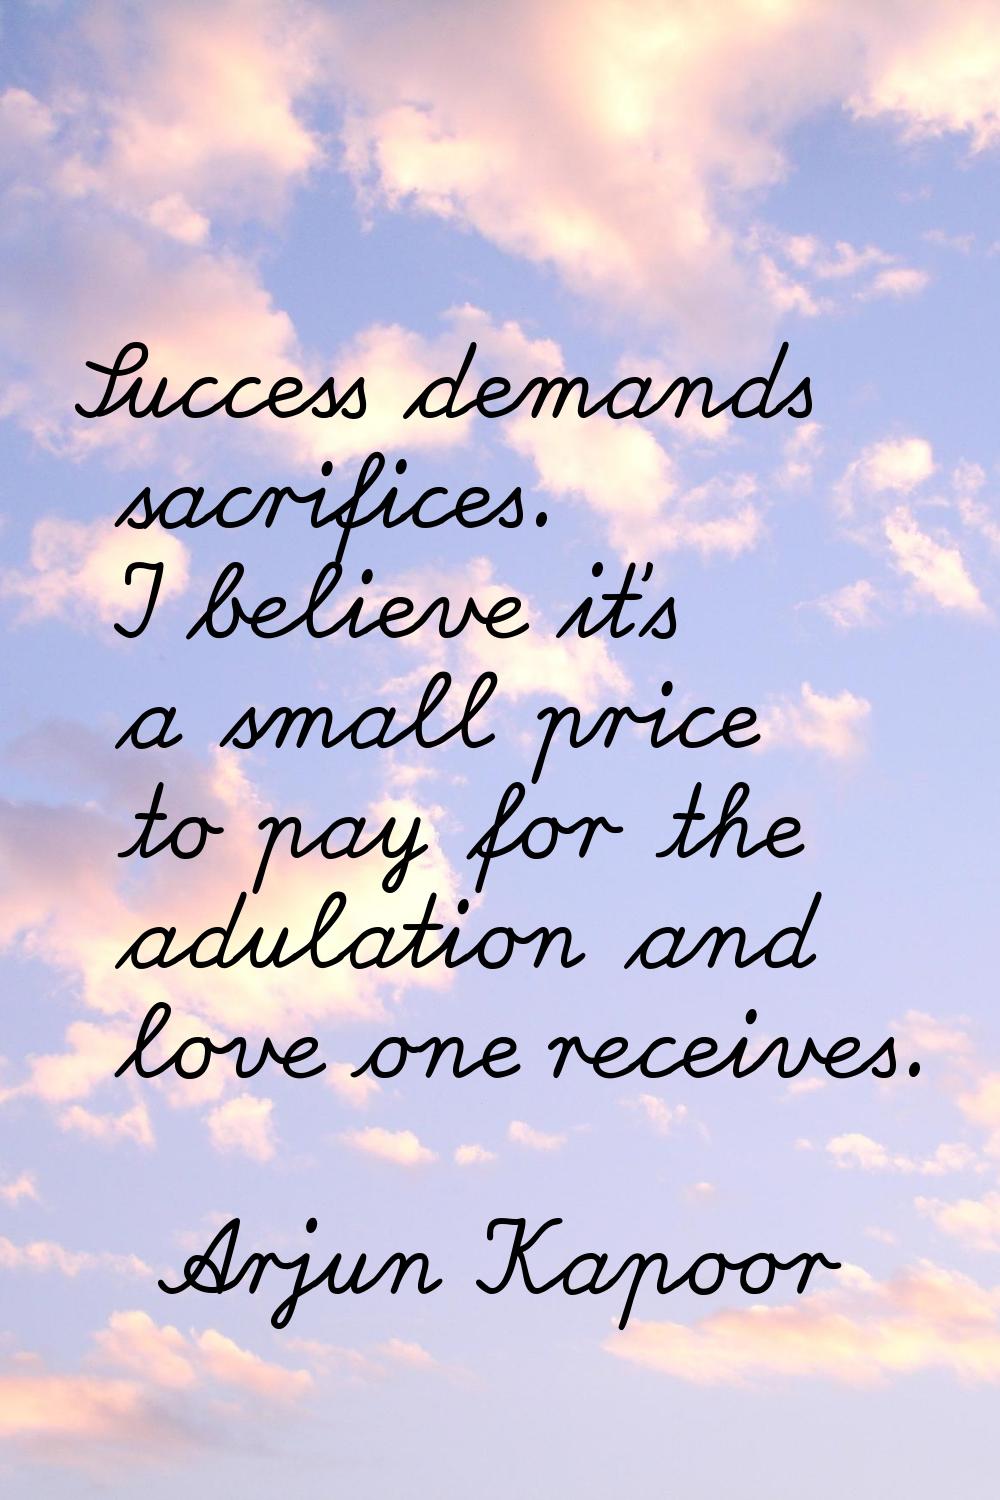 Success demands sacrifices. I believe it's a small price to pay for the adulation and love one rece